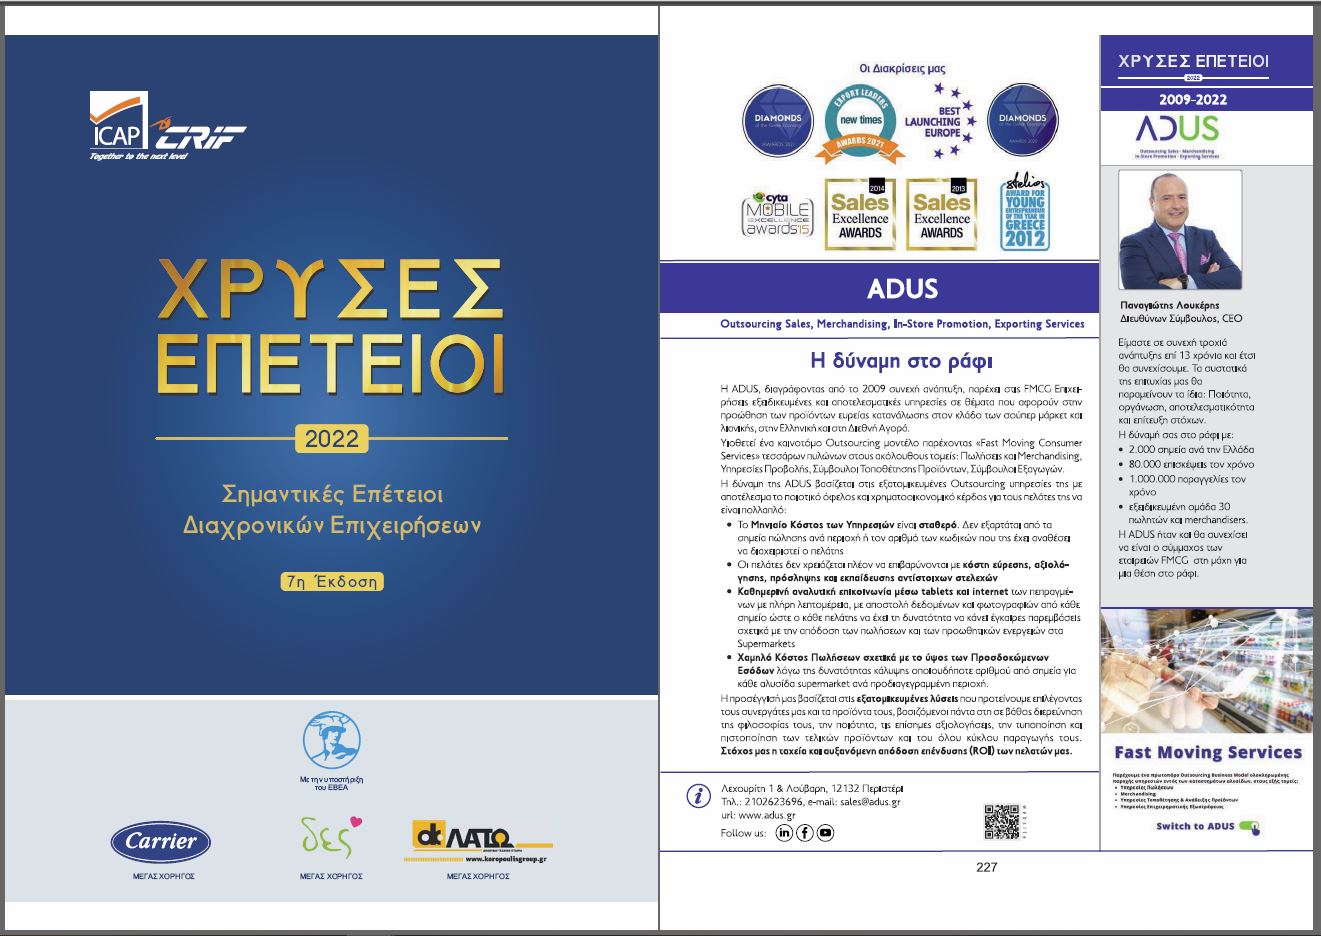 ADUS special magazine display to the business edition of ICAP CRIF “Golden Anniversaries 2022”!